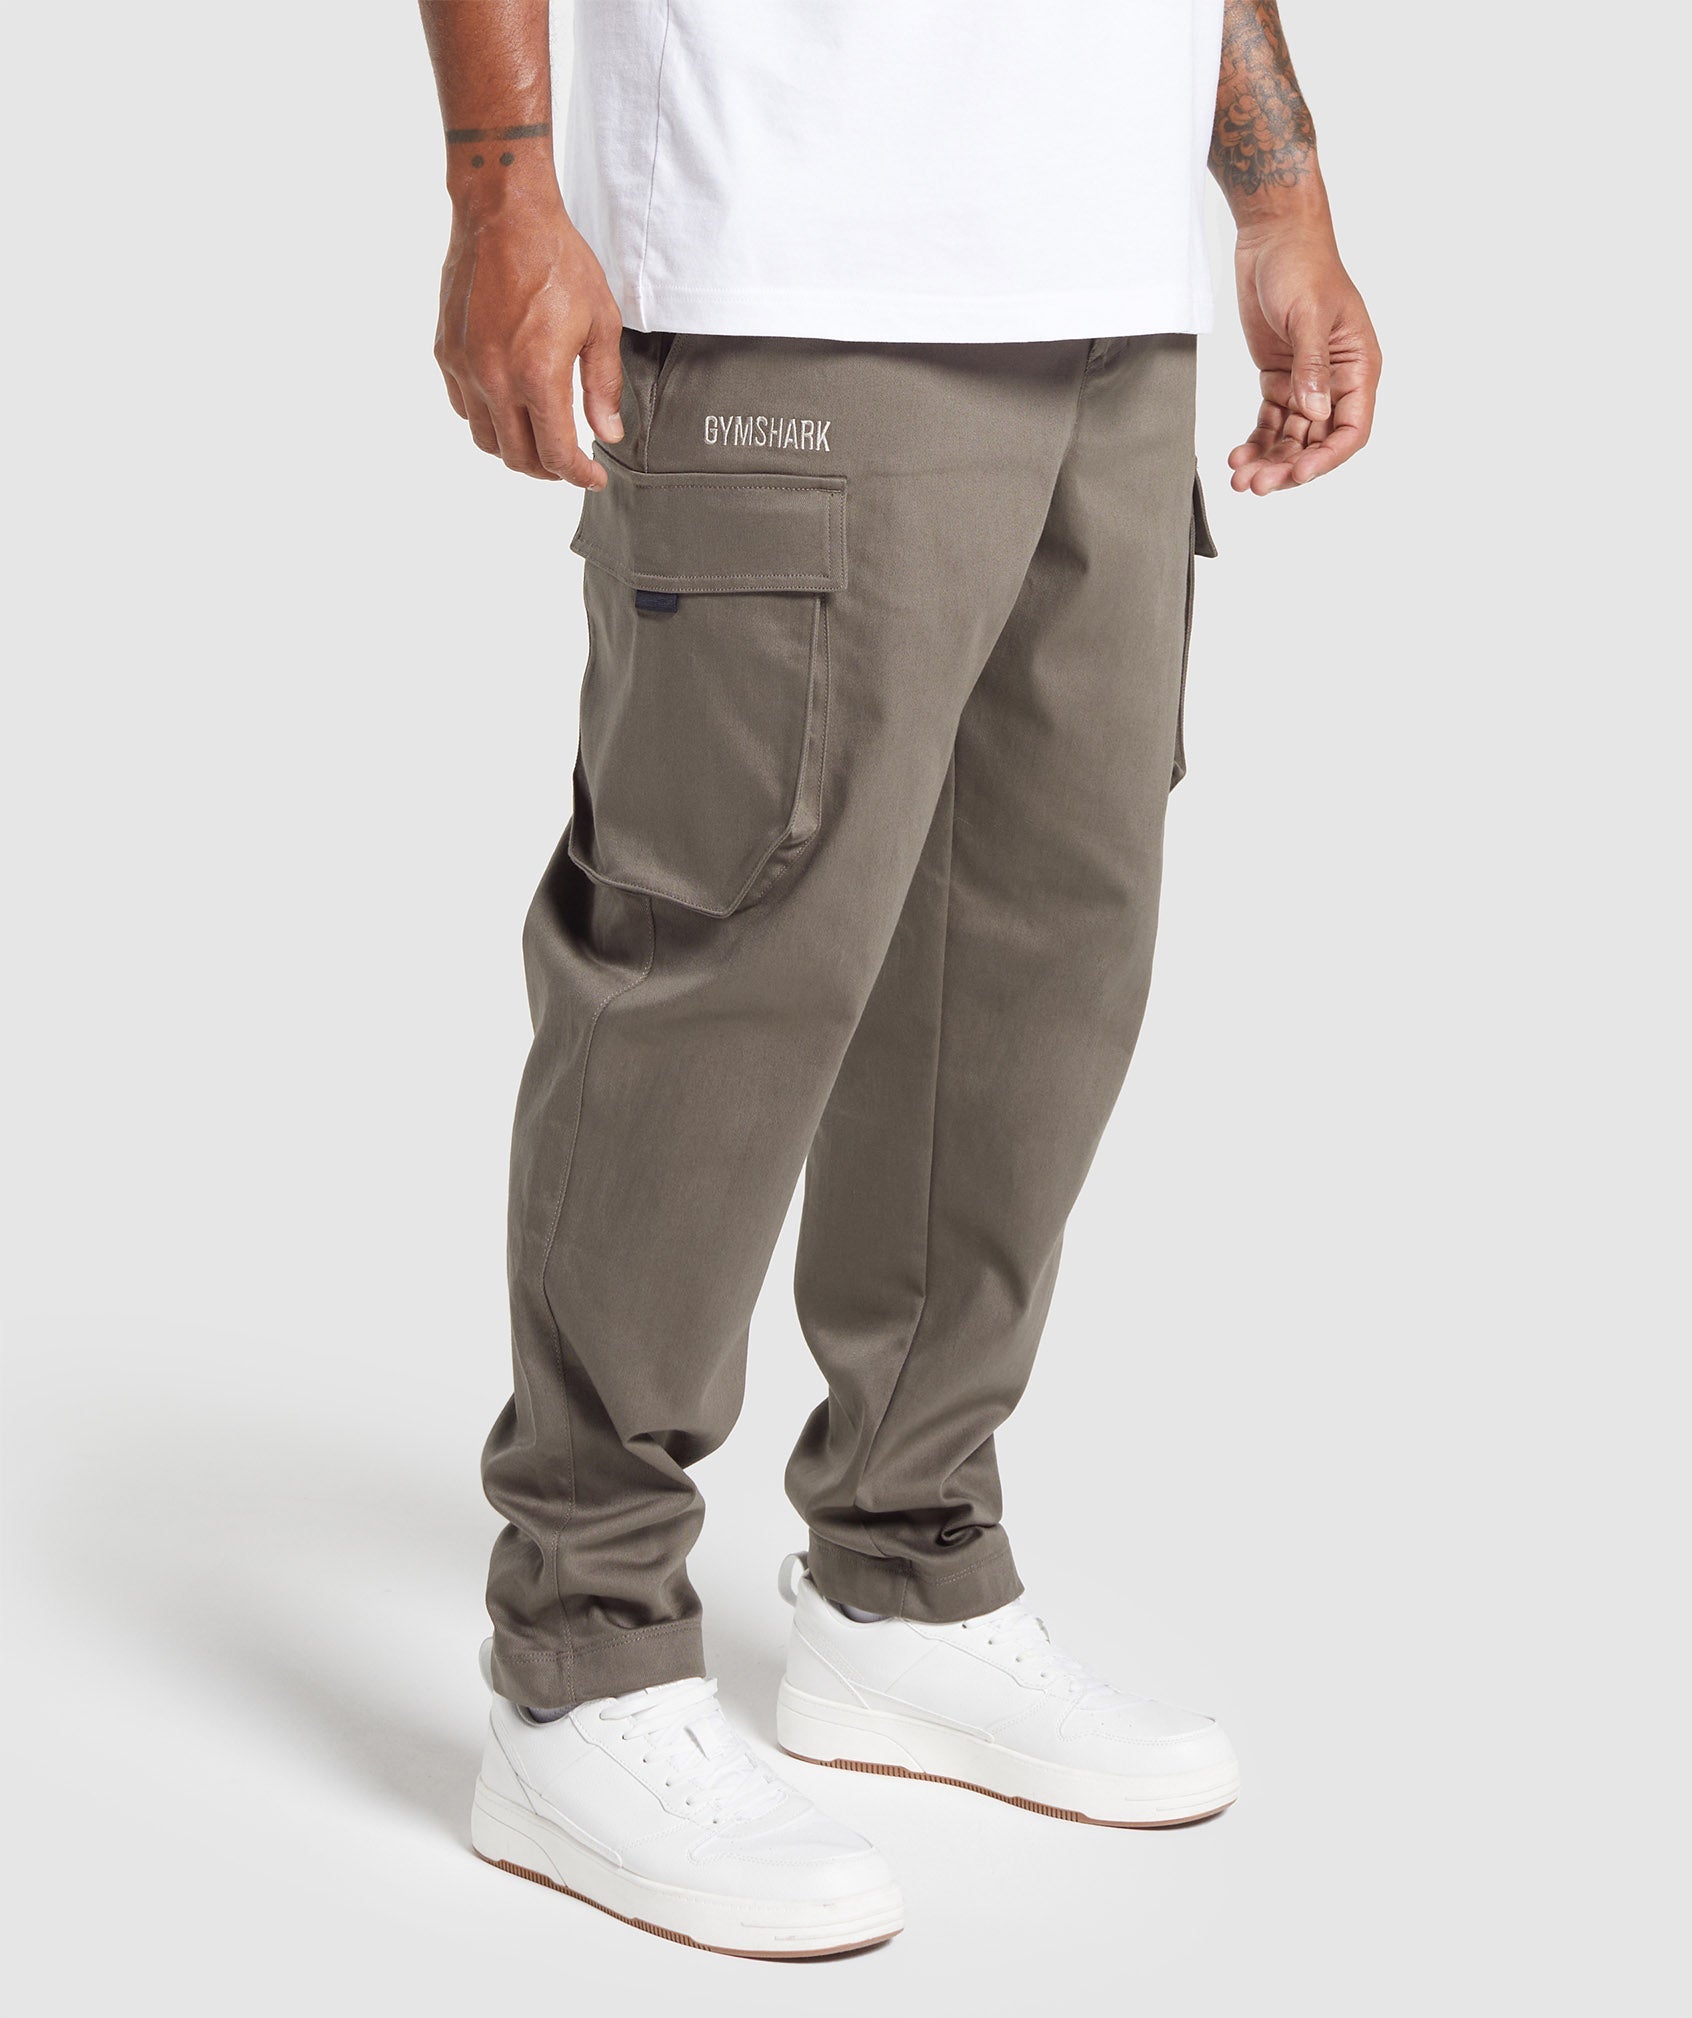 Rest Day Woven Cargo Pants in Camo Brown